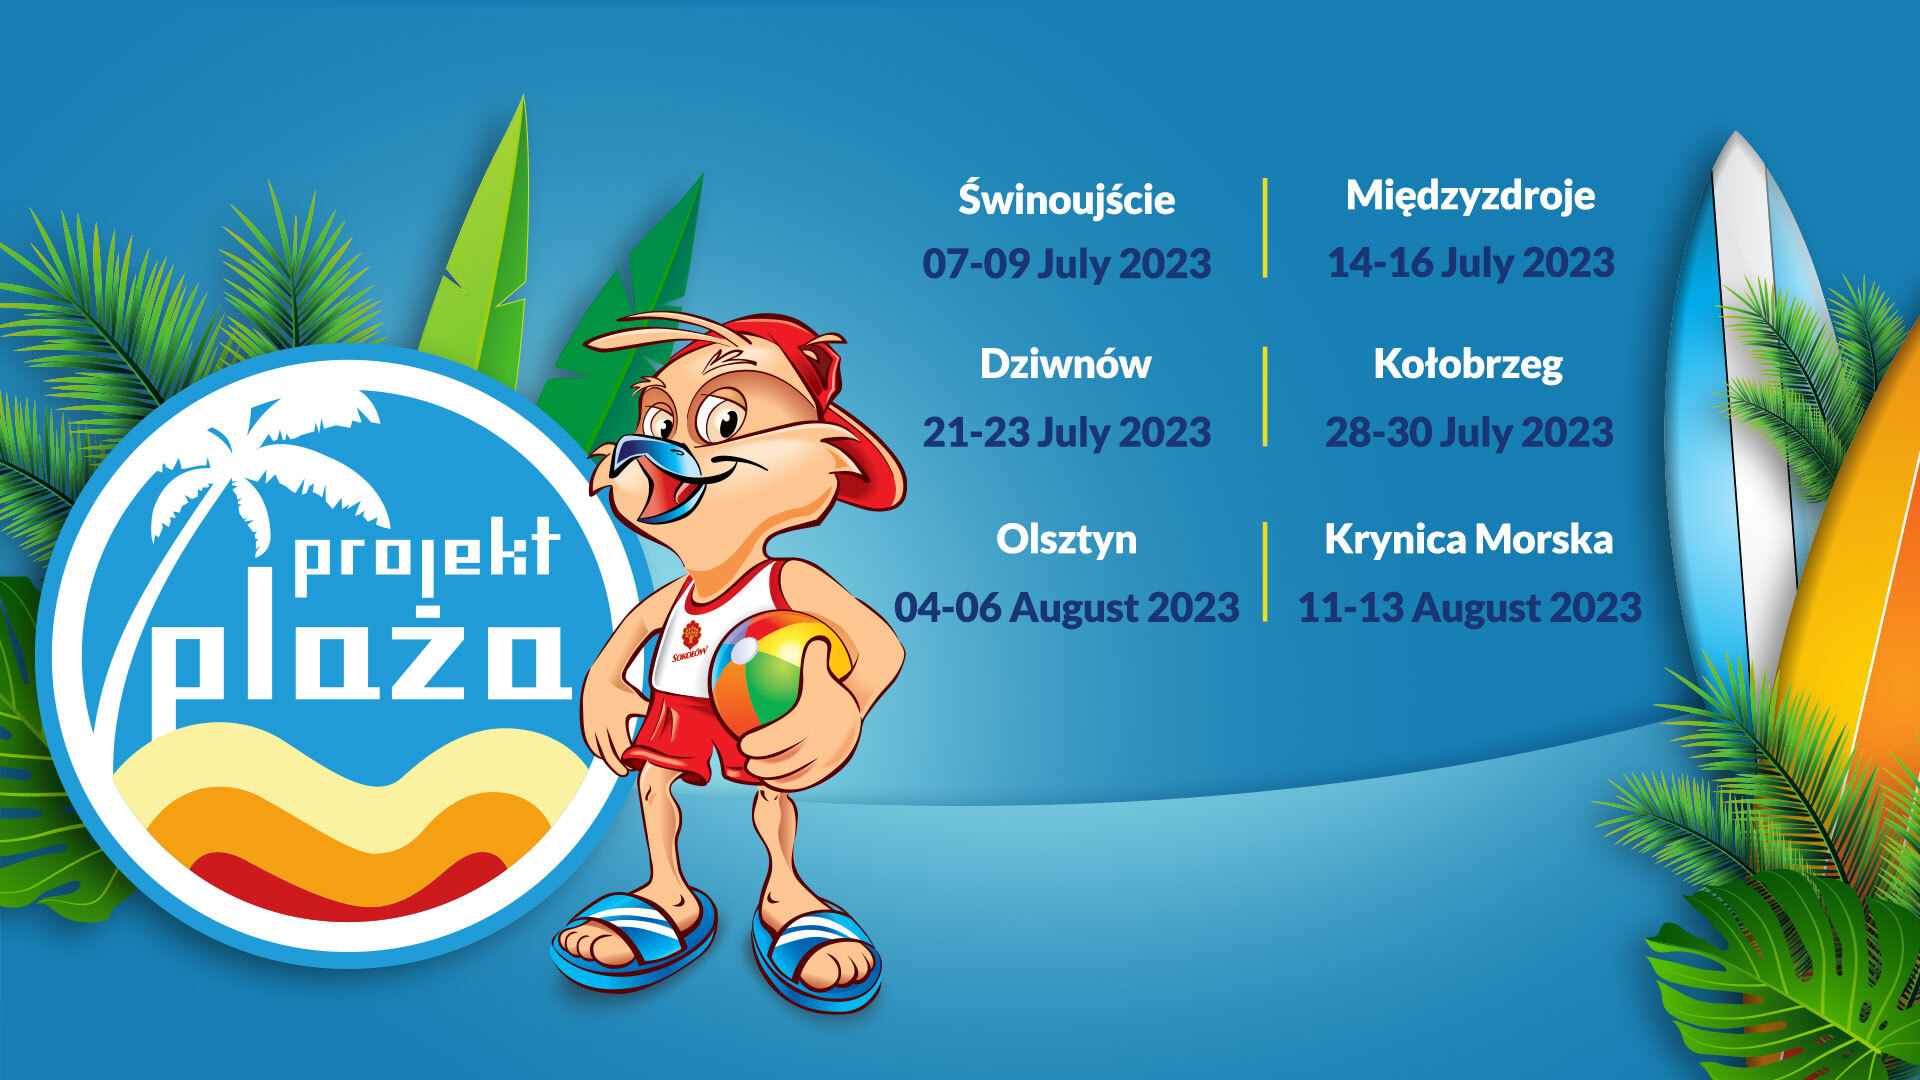 We are launching this year's edition of the Projekt Plaża” 